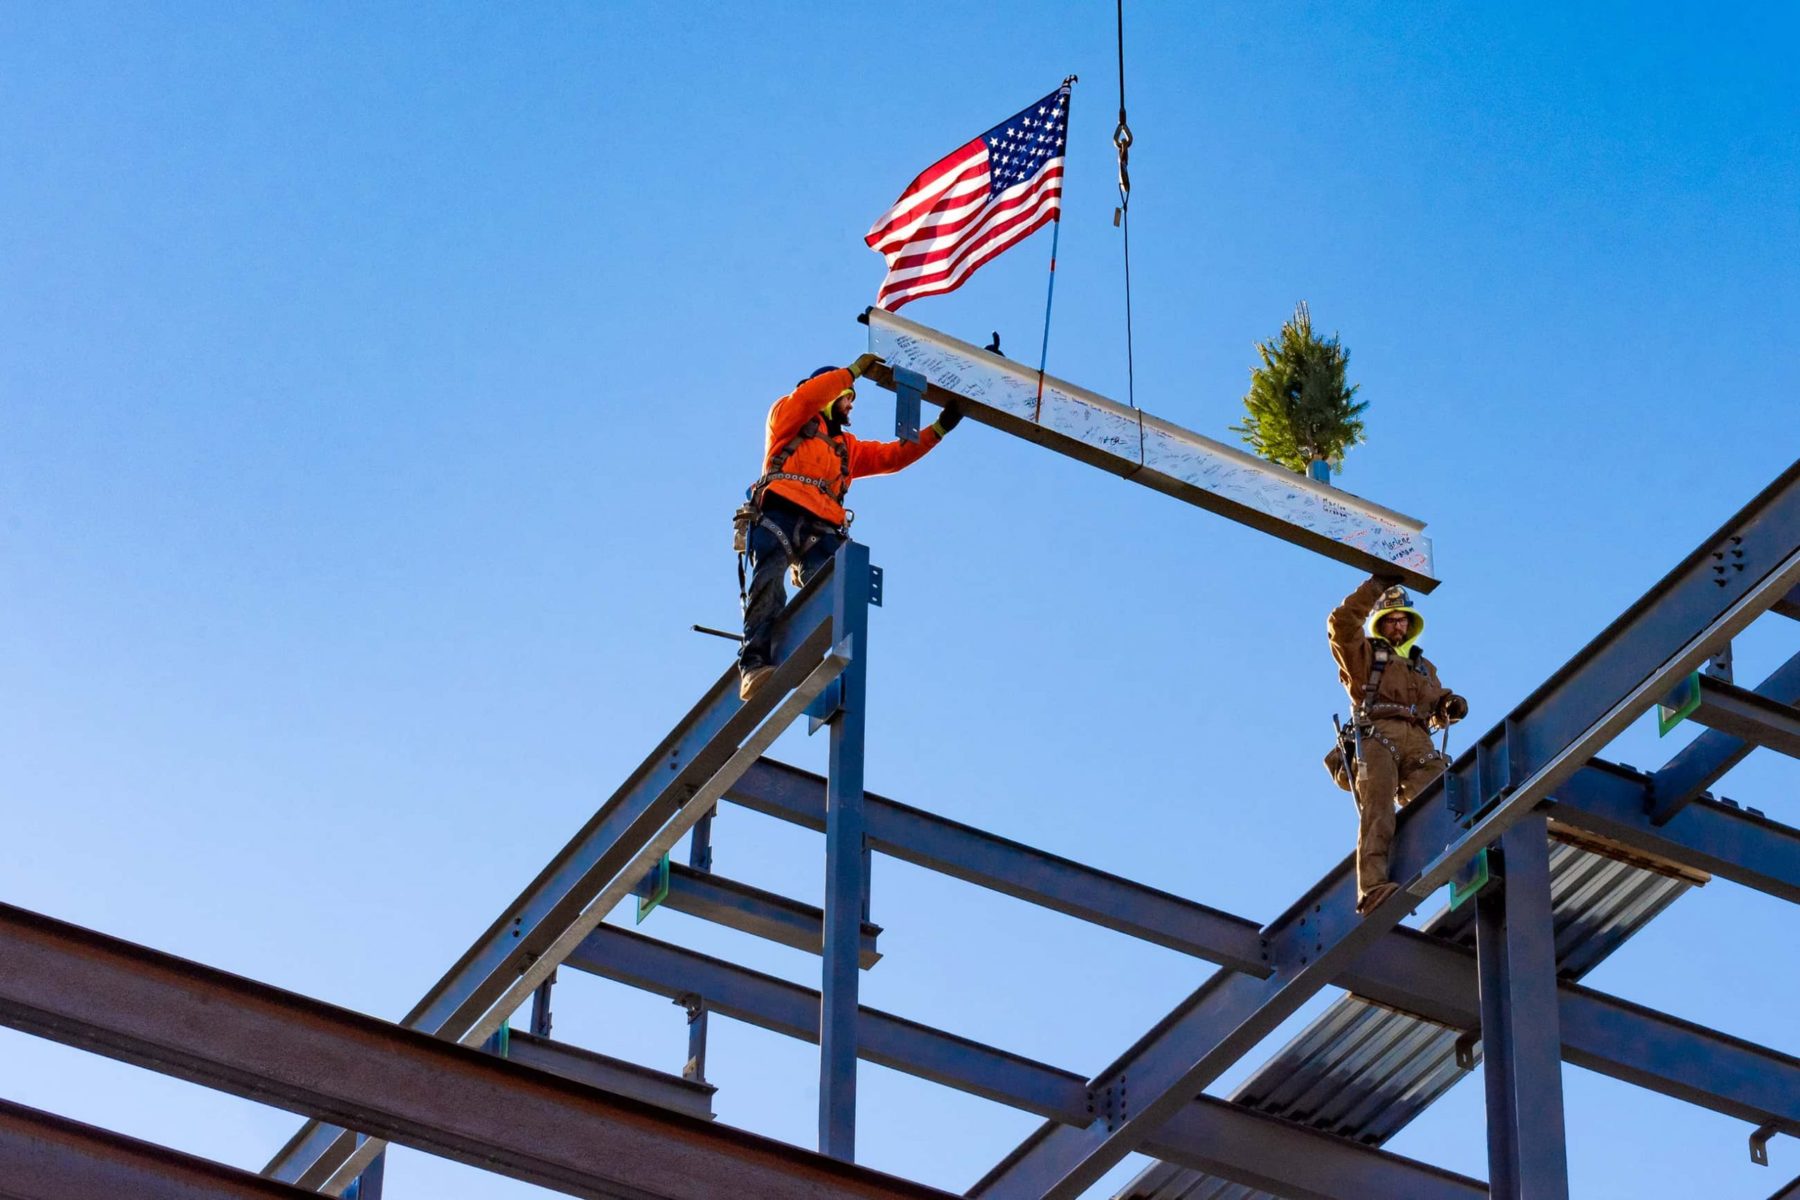 Construction workers erect the final steel beam on the structure